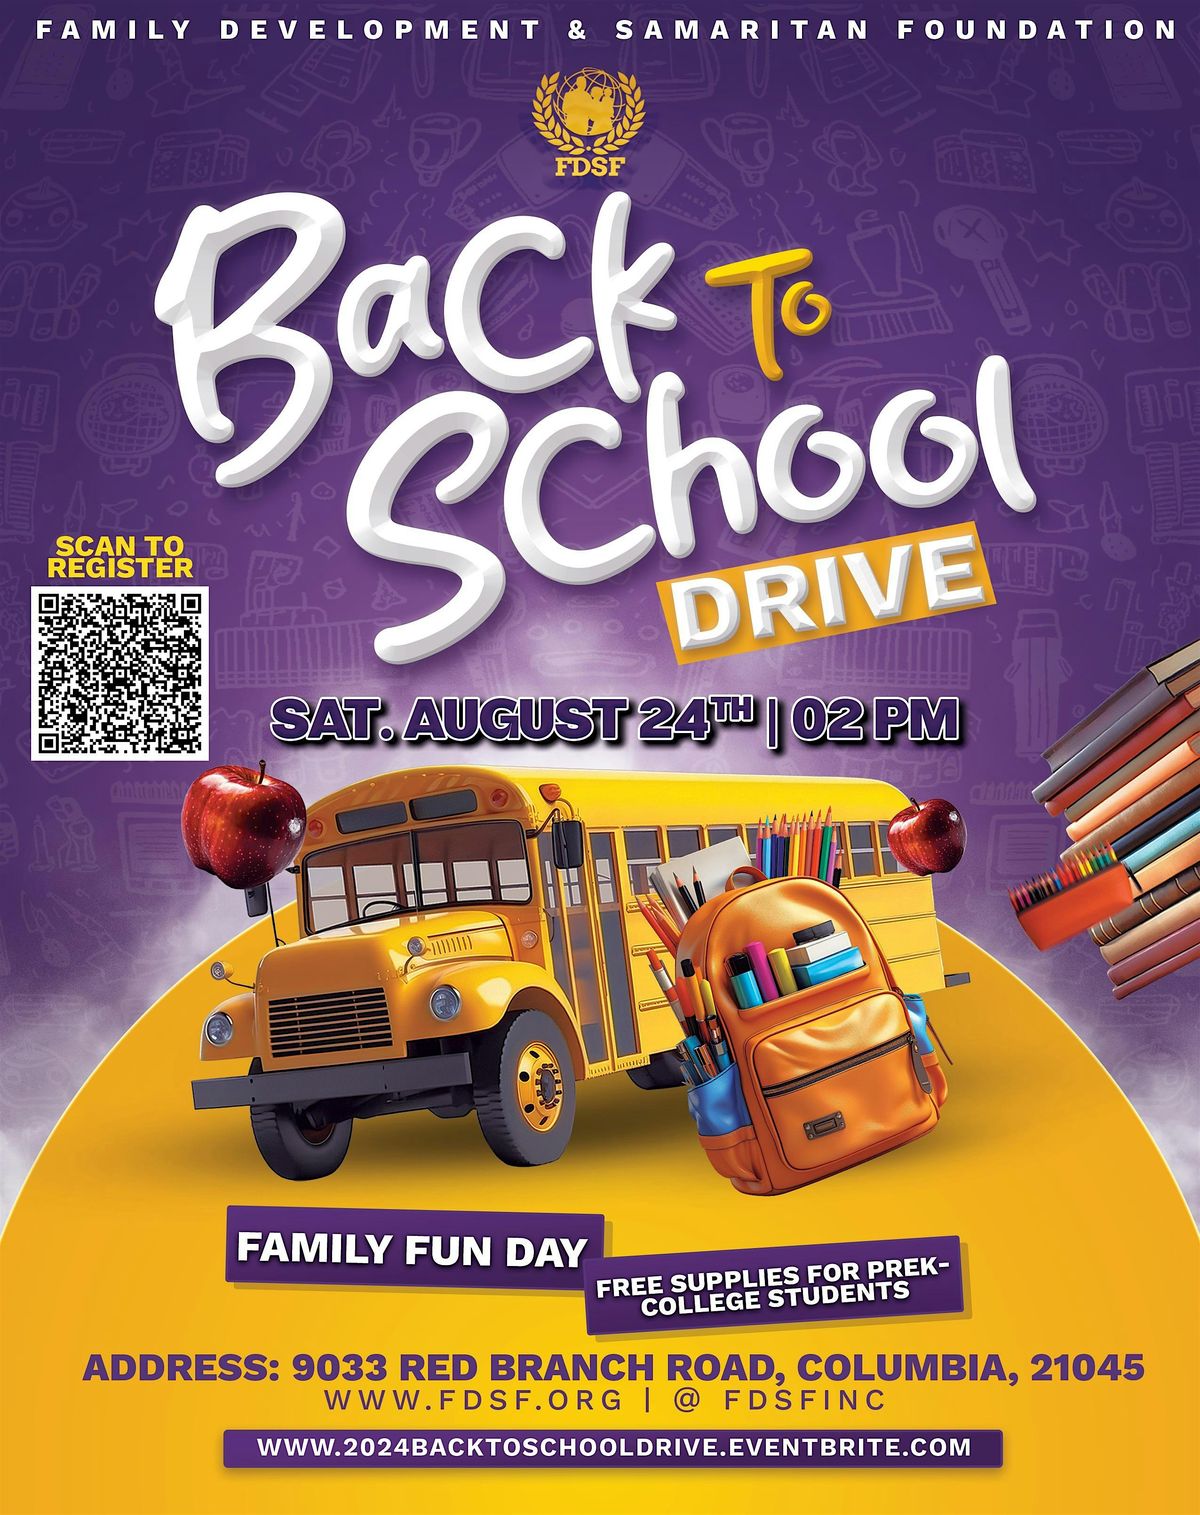 Back to School Drive & Family Fun Day